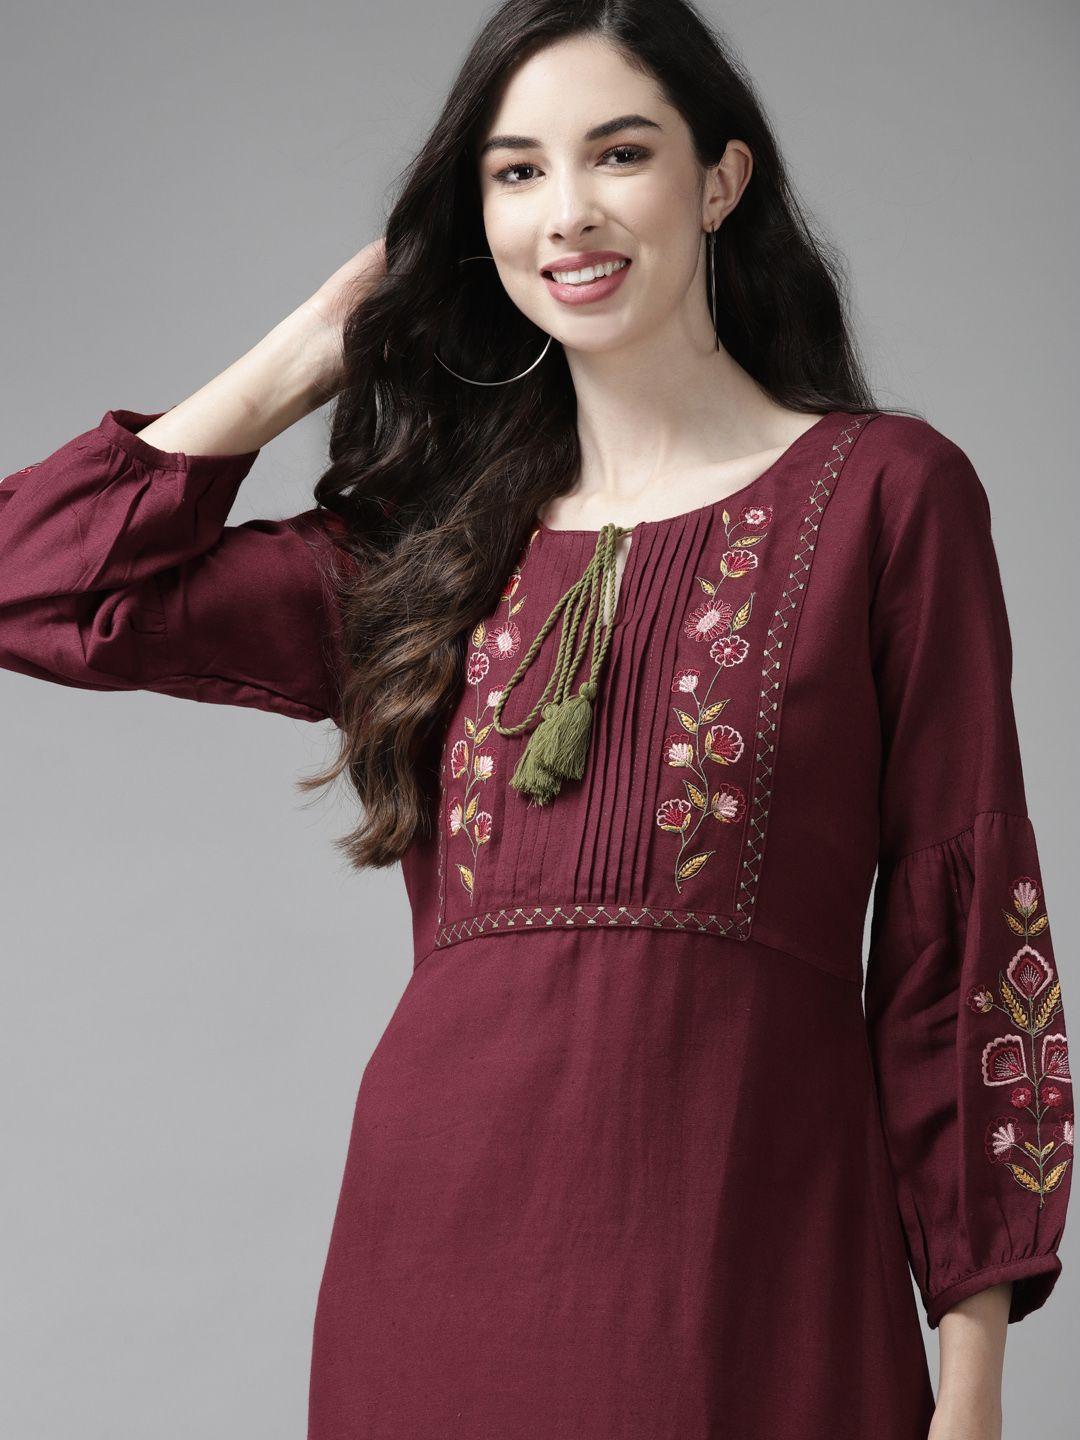 yufta maroon floral embroidered pure cotton ethnic a-line dress